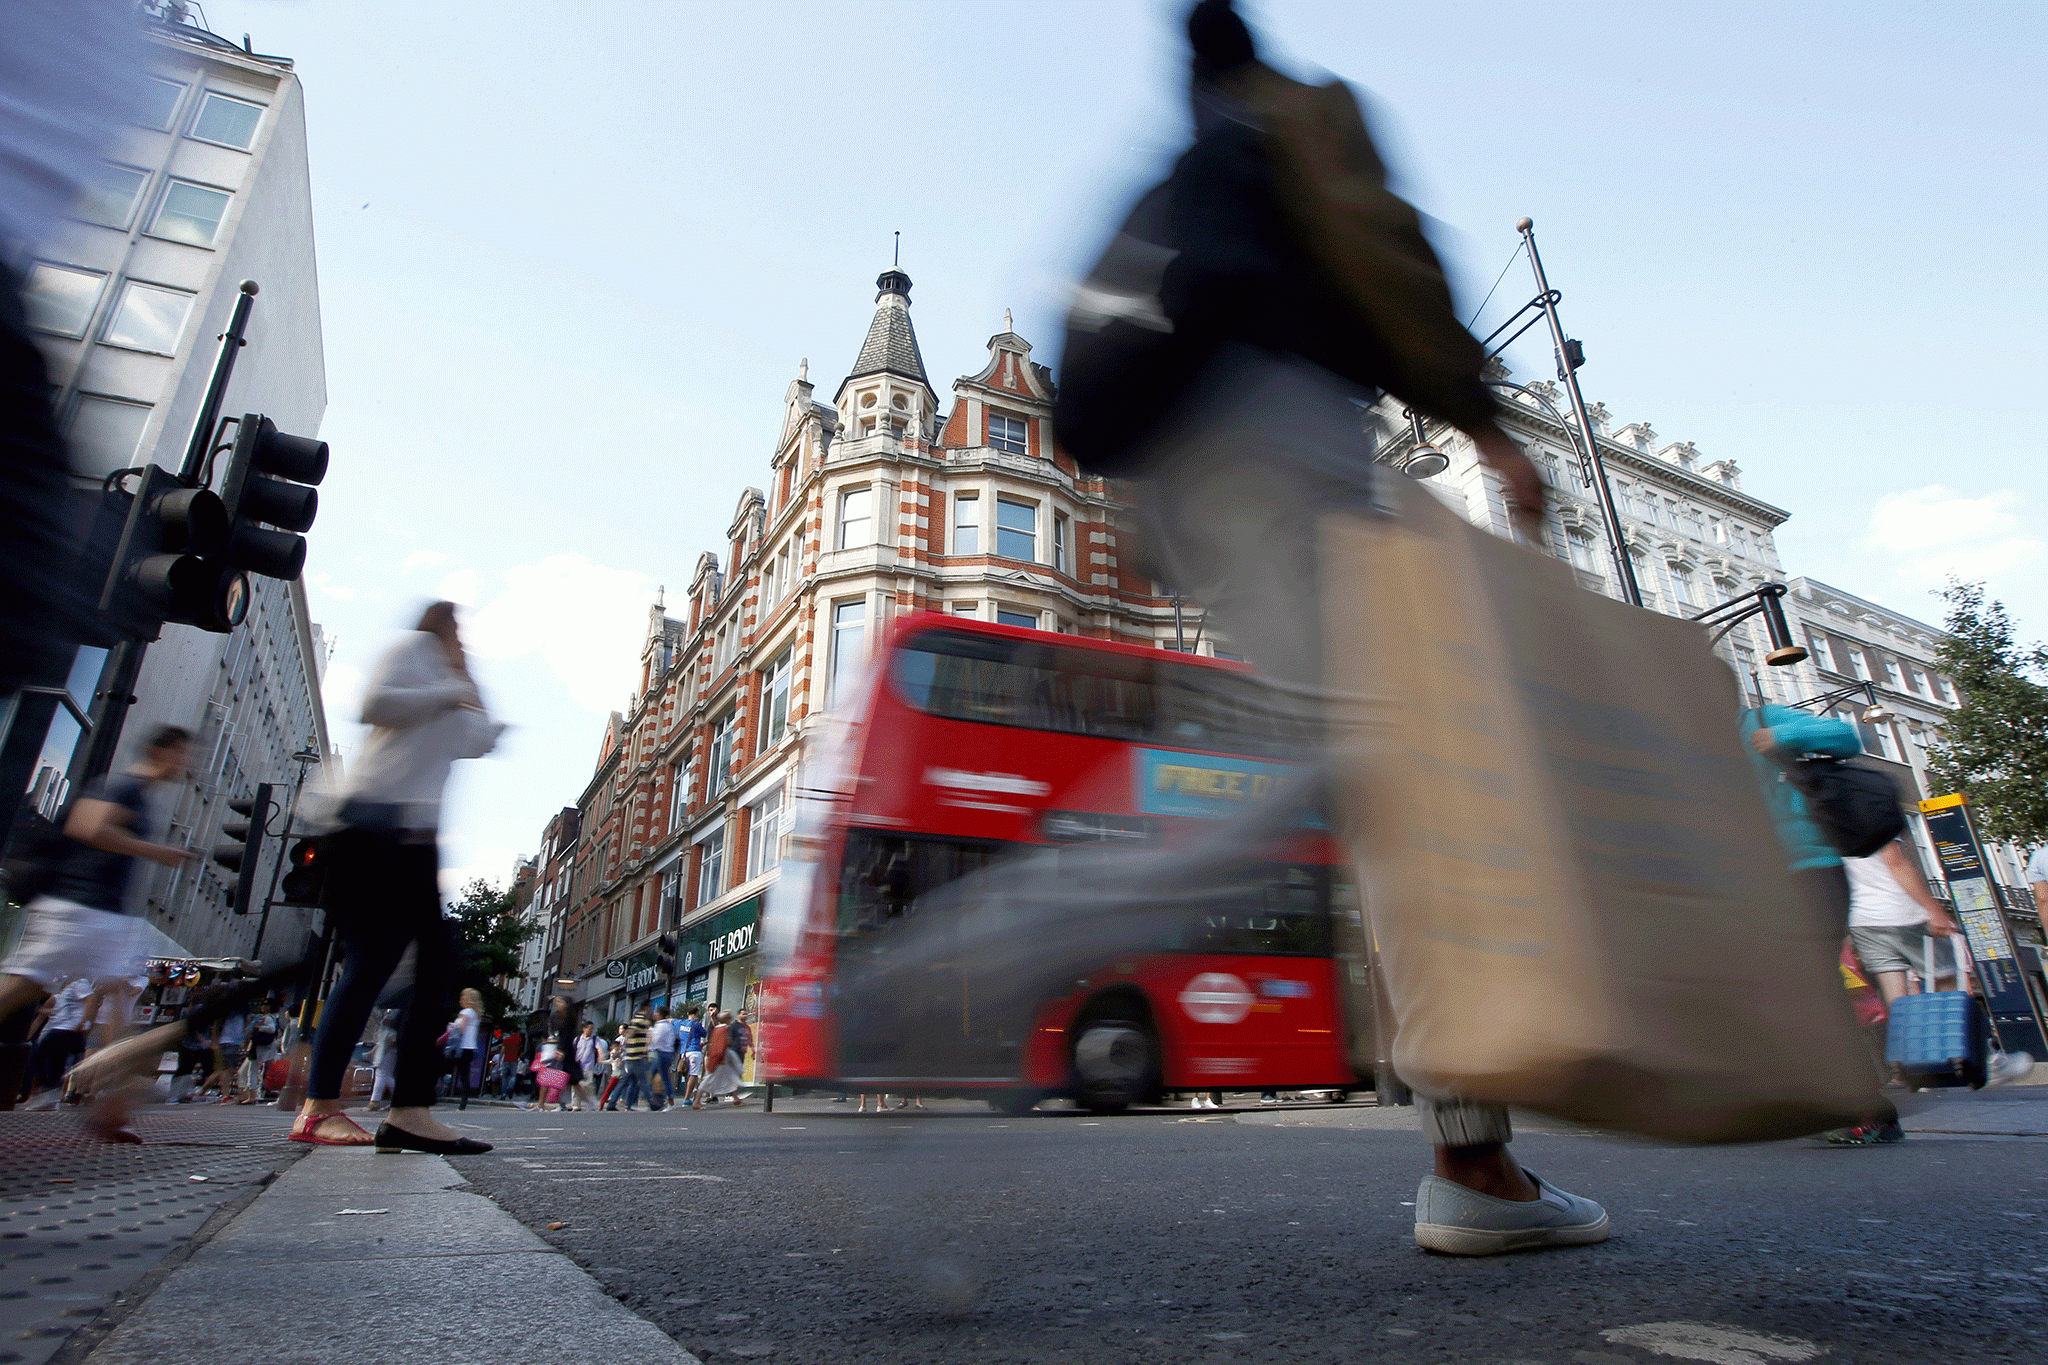 Consumers spending has been strong but price rises caused by a weak pound are set to bite, say economists